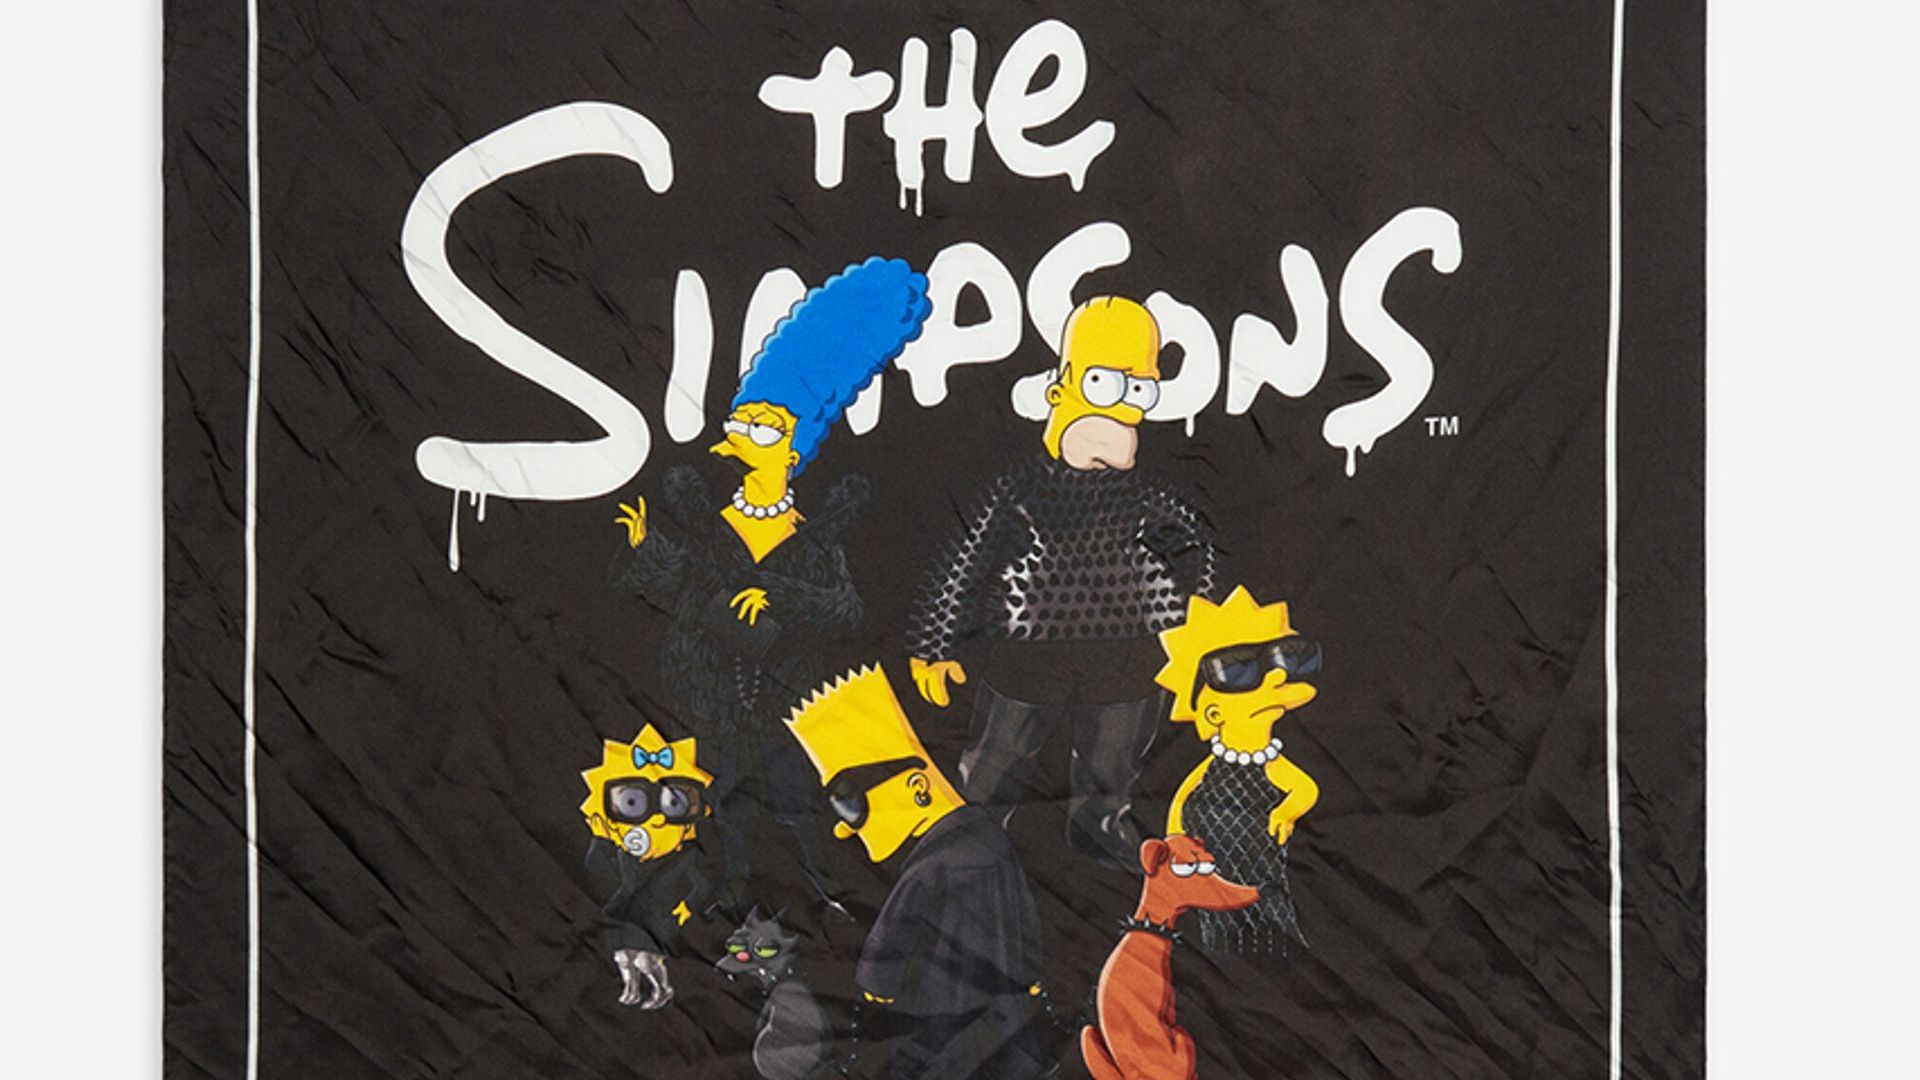 Balenciaga Drops The Simpsons Collection of Hoodies Tshirts  WWD